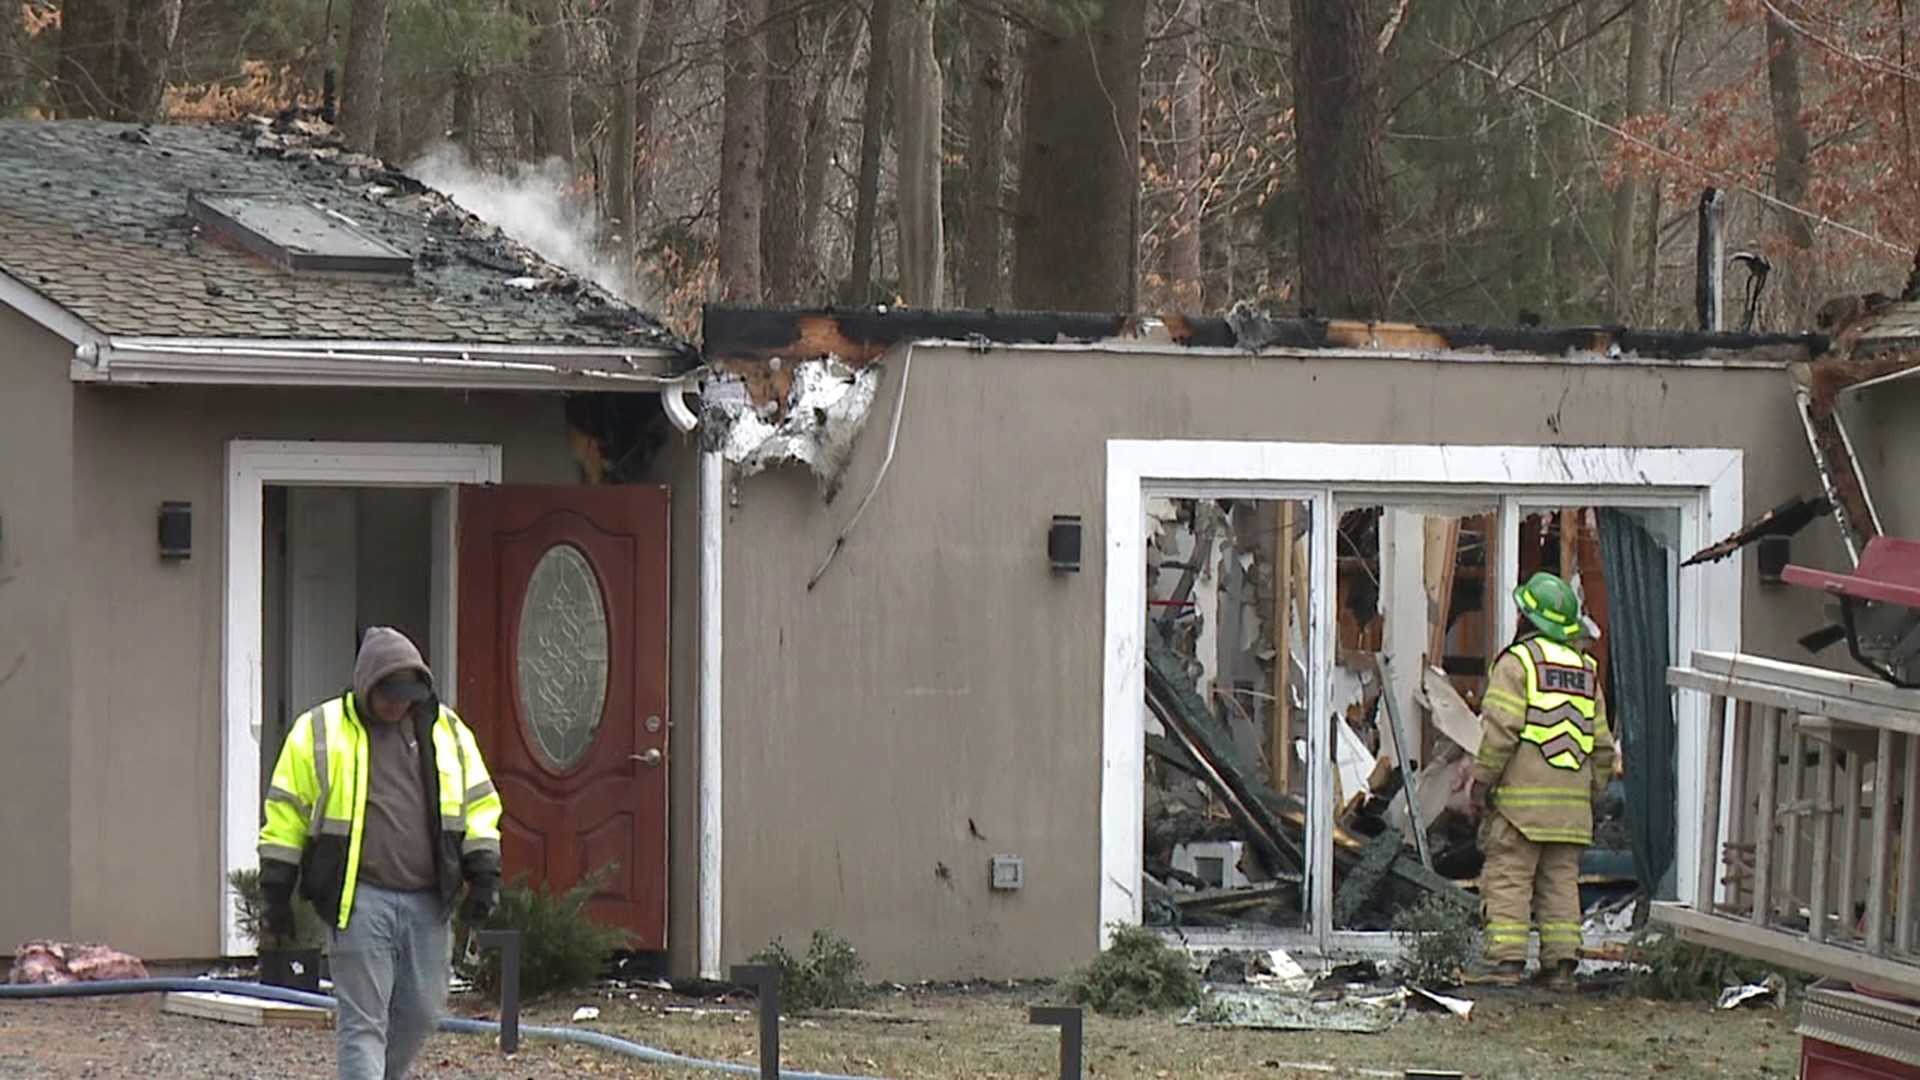 Flames broke out around 1 p.m. Saturday at a home along the 100 block of Route 940 in Blakeslee.